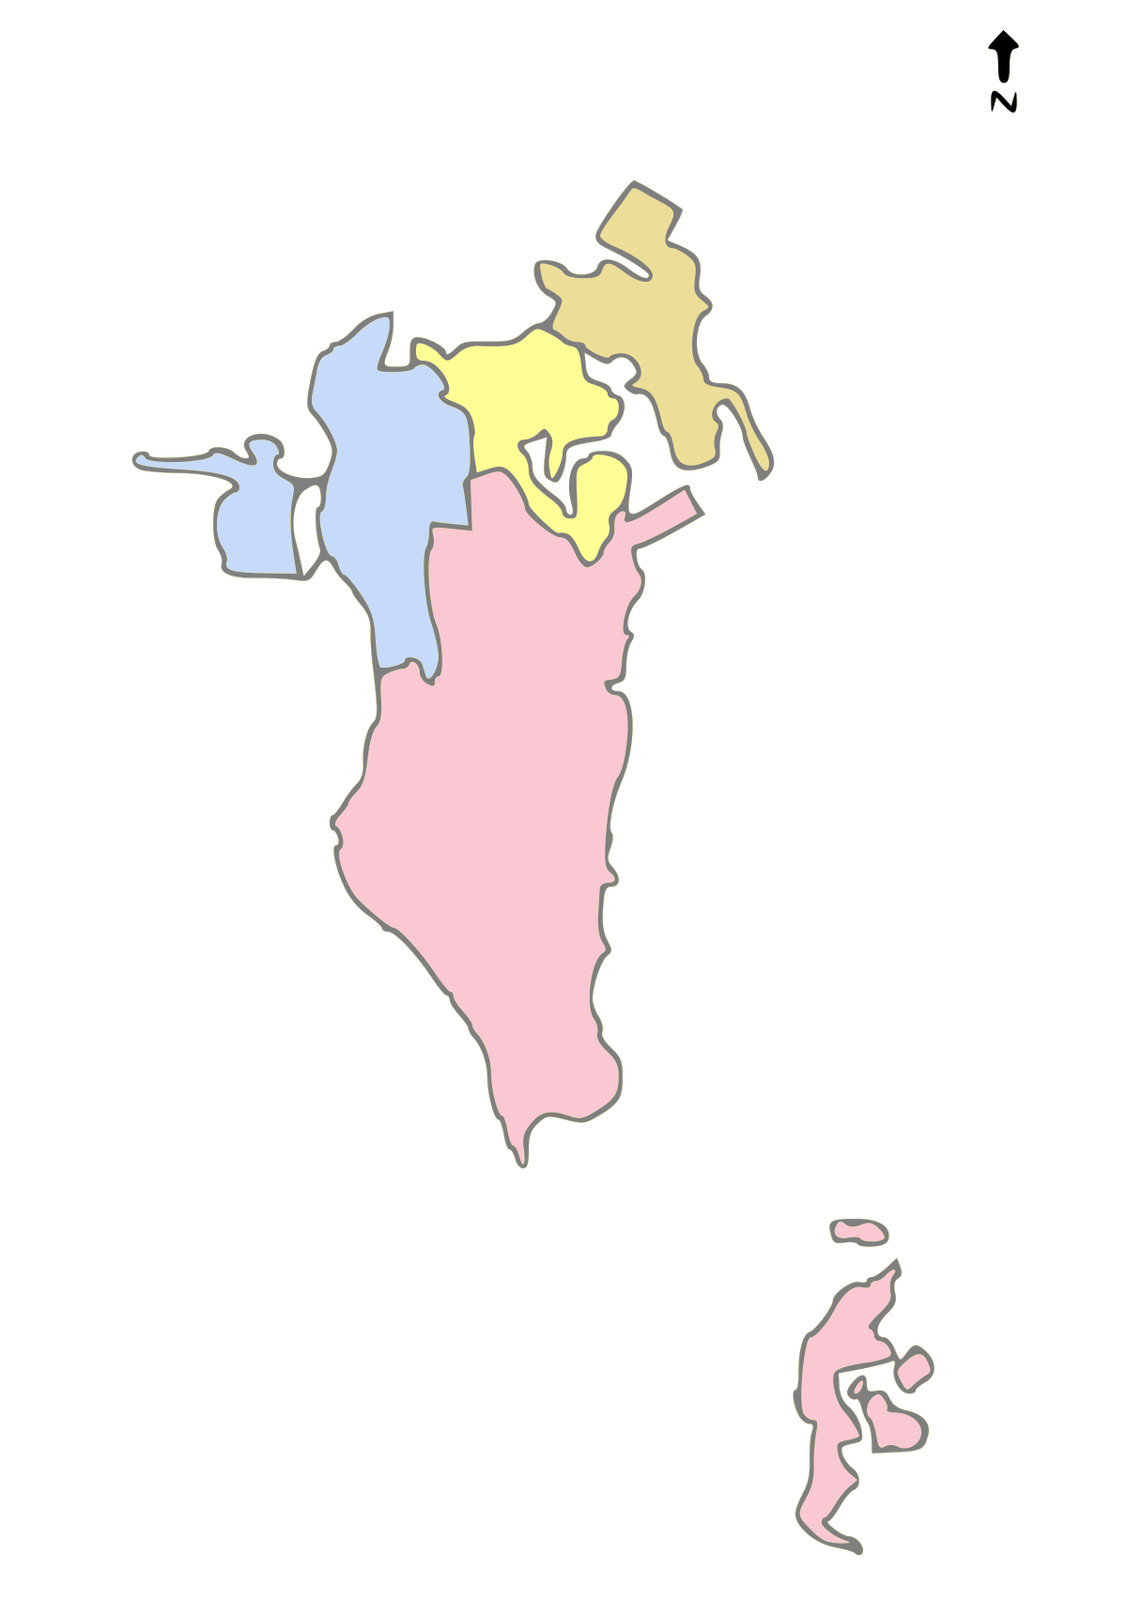 1200px-New_Governorates_of_Bahrain_2014.svg.png